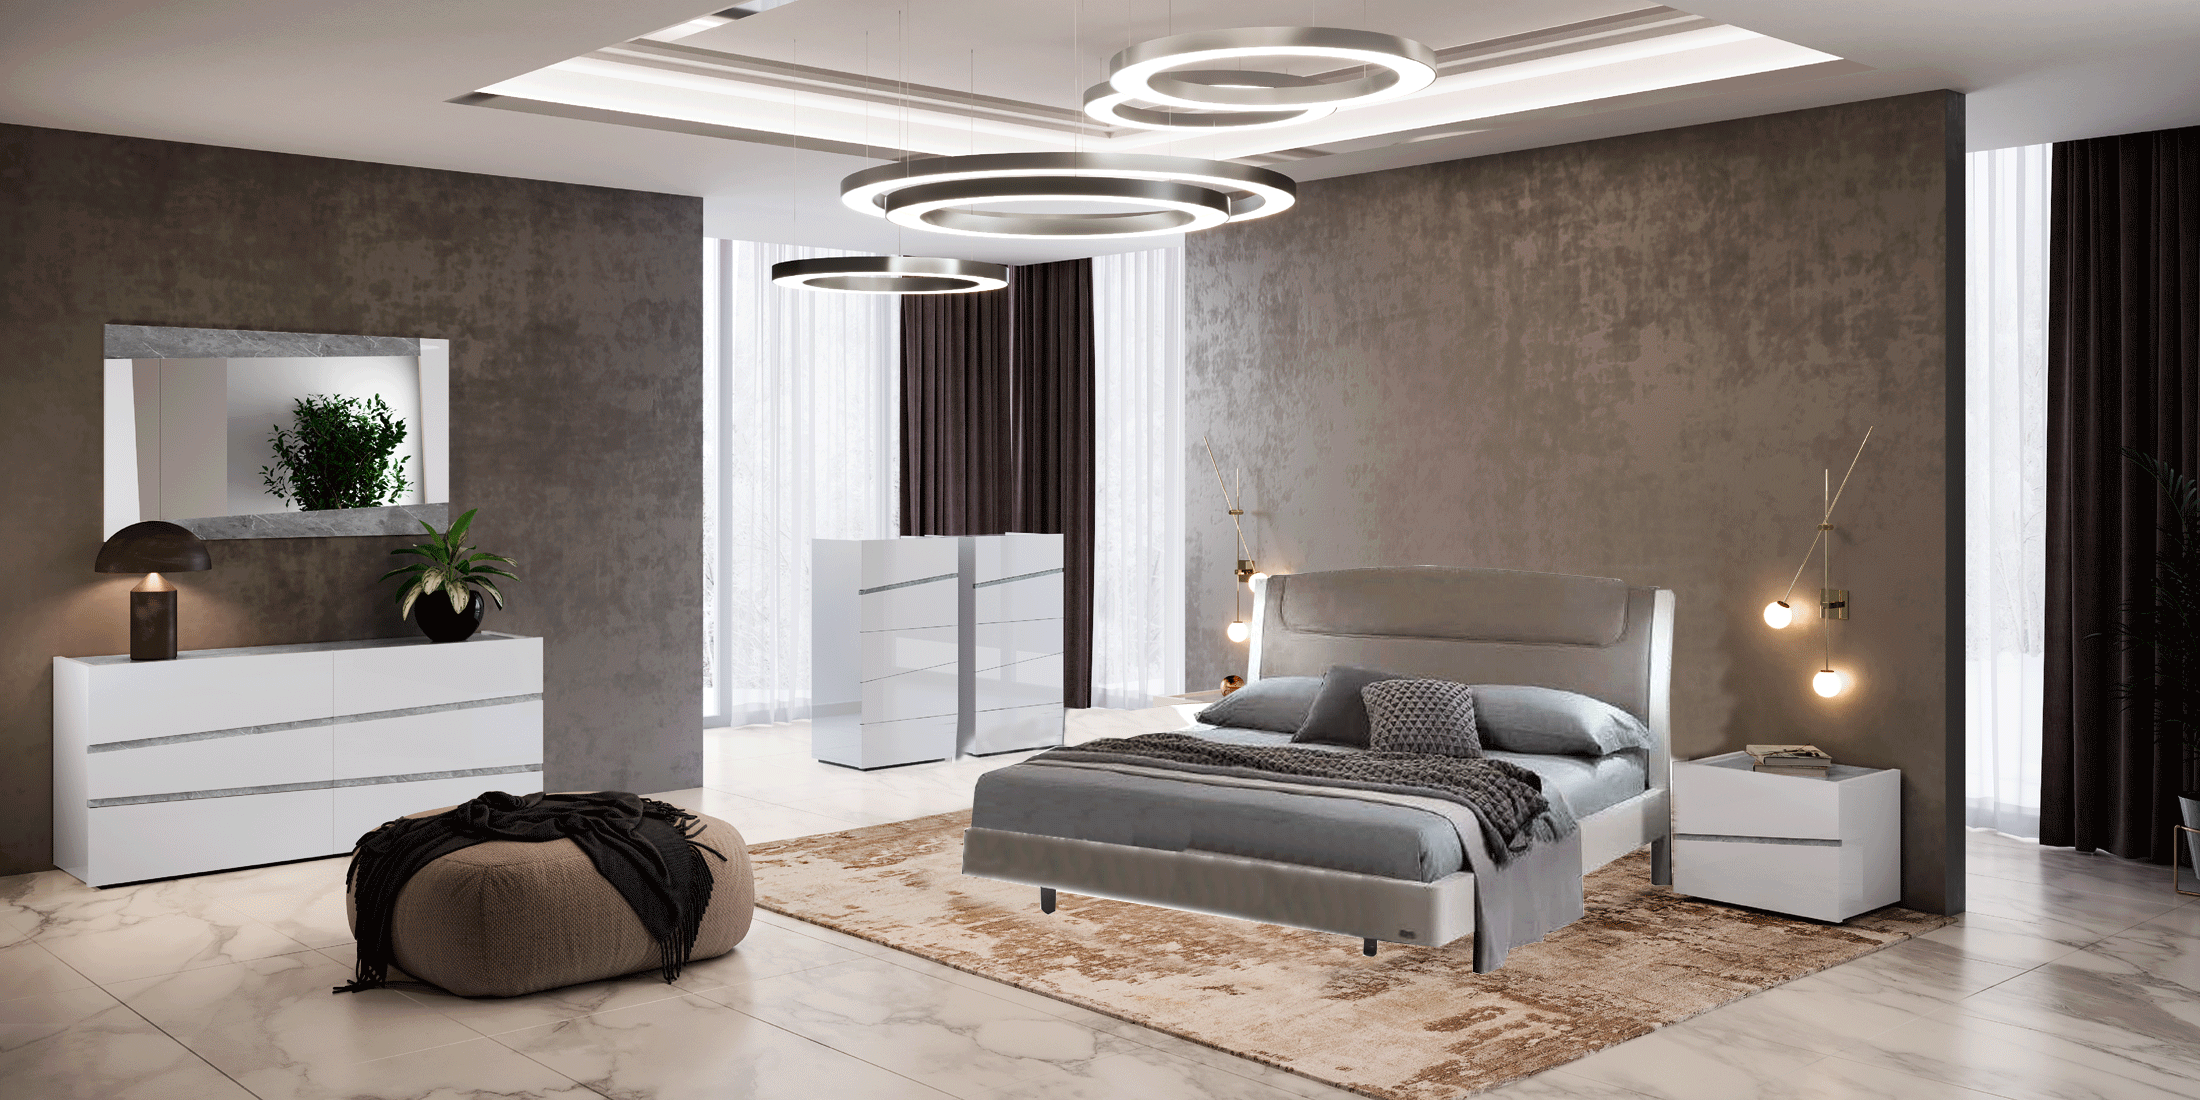 Wallunits Hallway Console tables and Mirrors Luna White Bed with Alba cases, Only bed is on sale